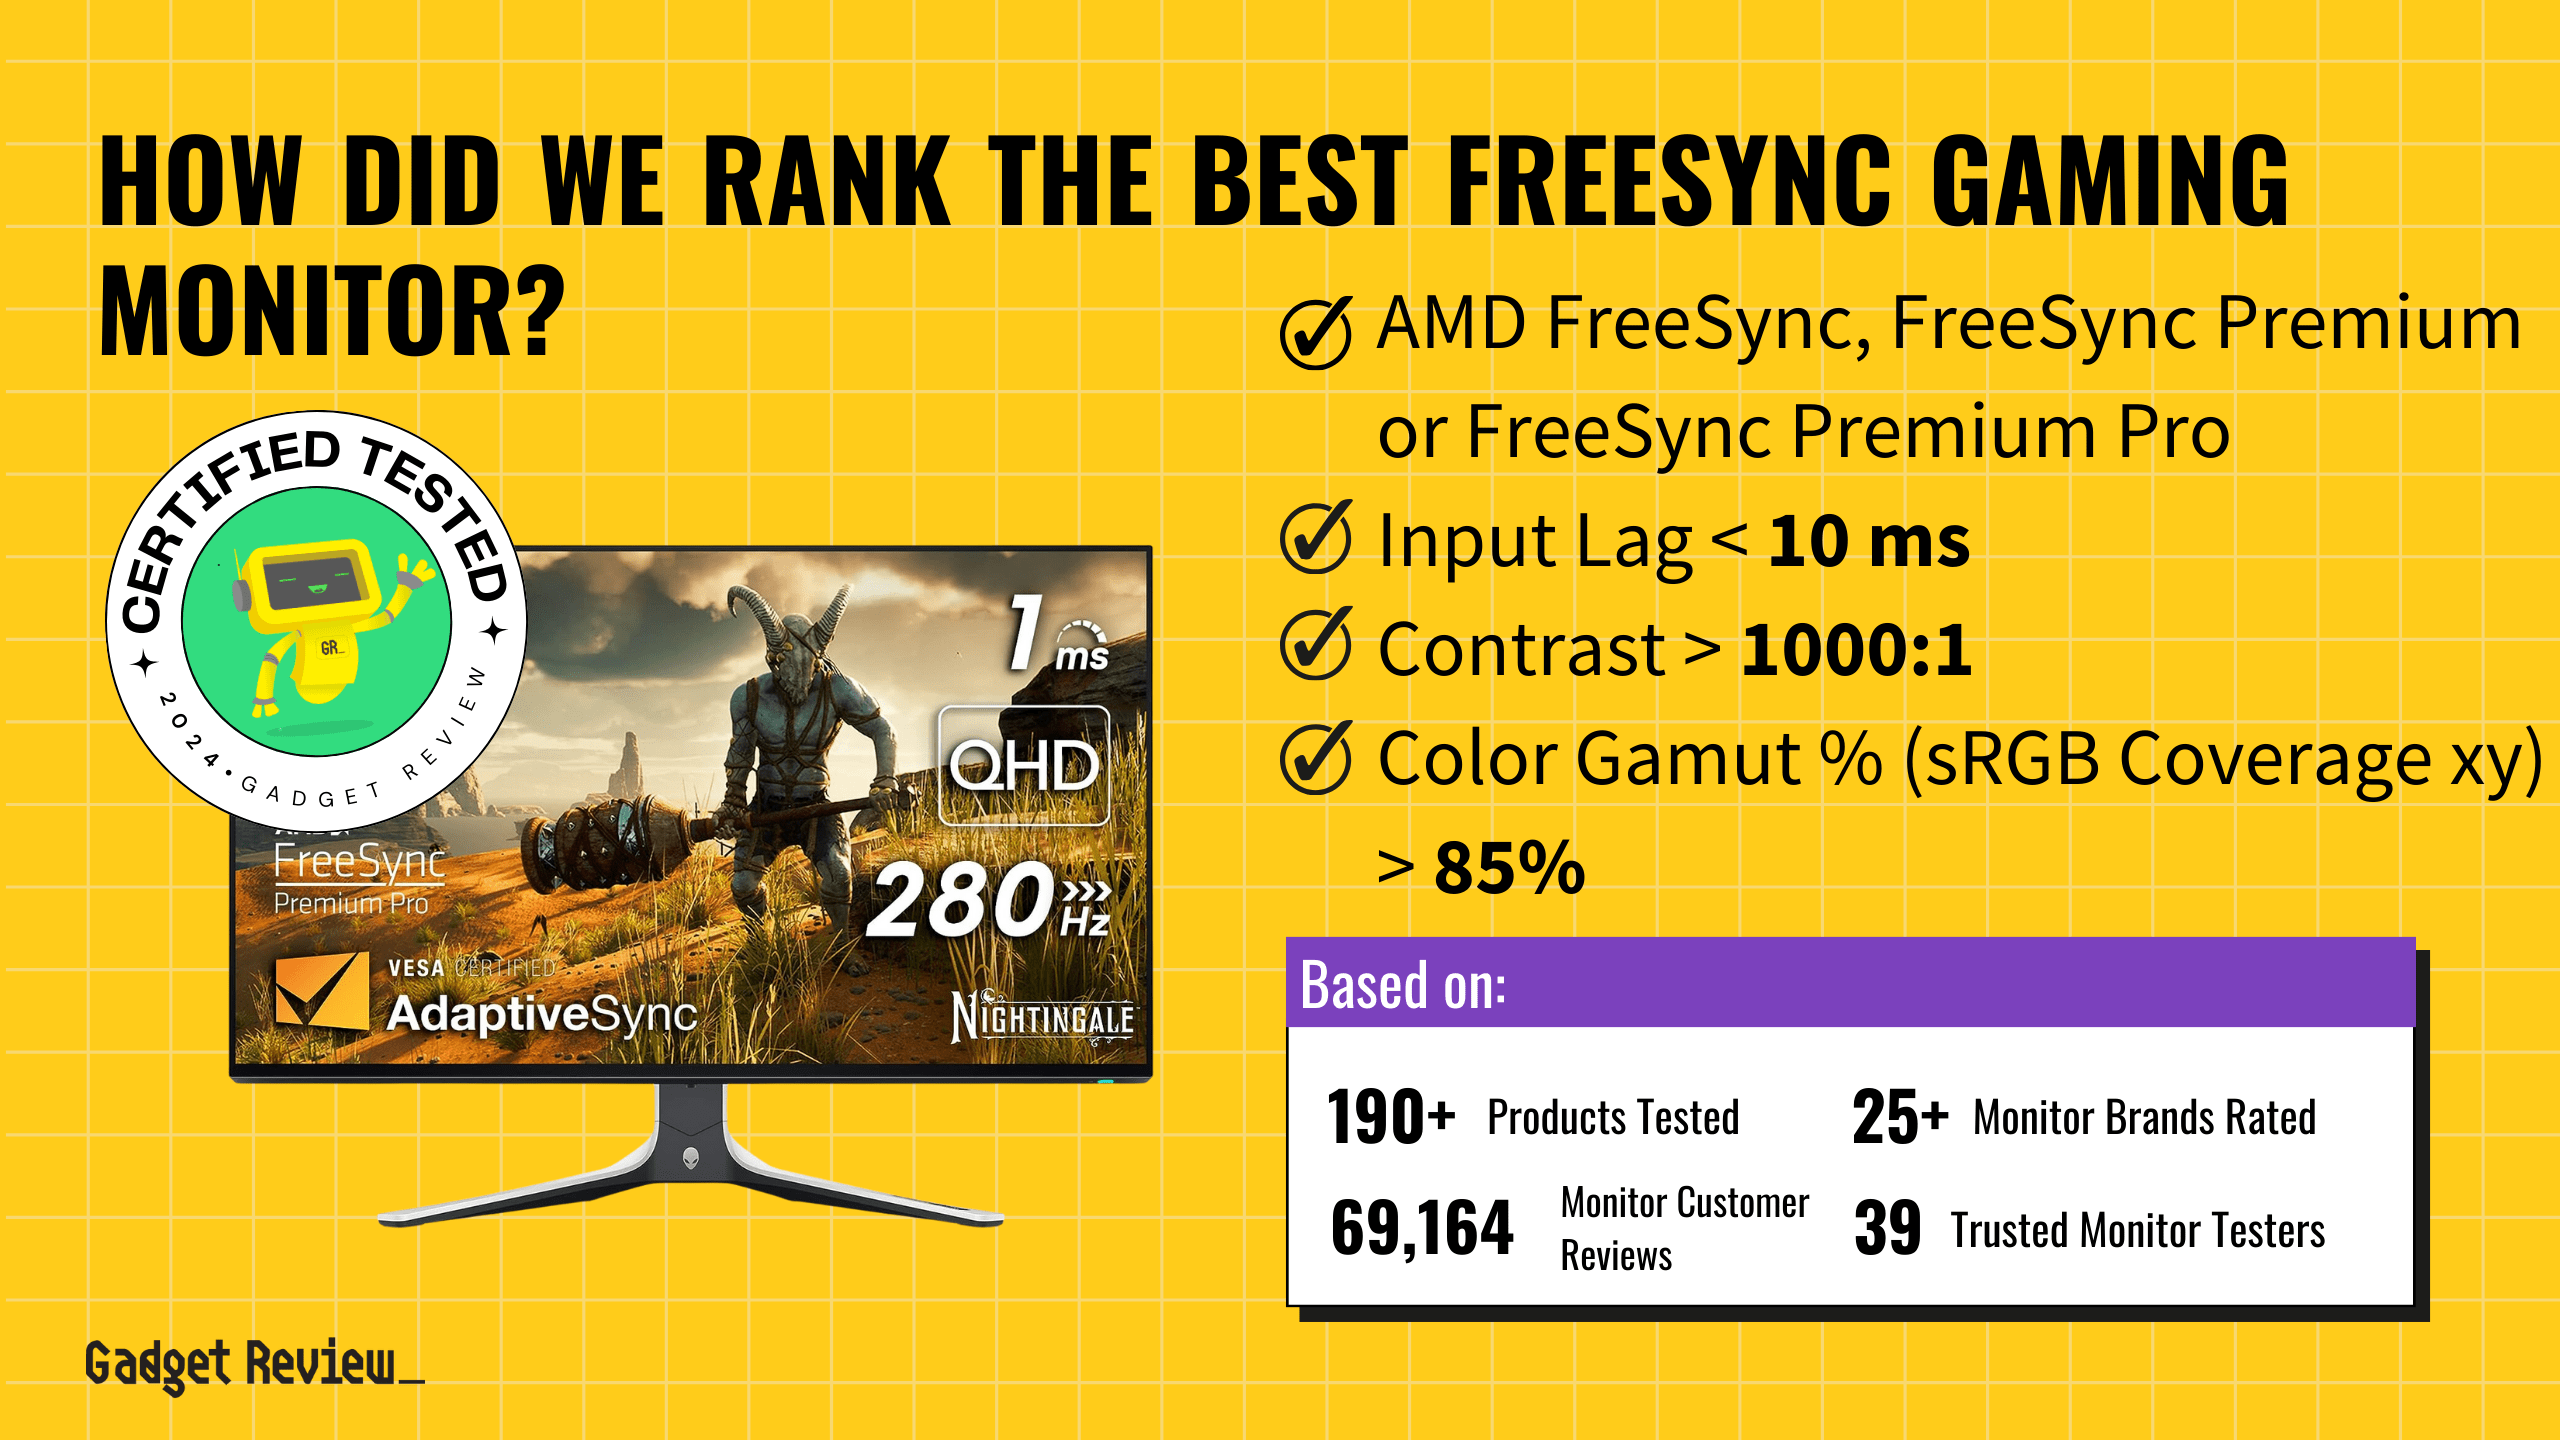 best freesync monitors guide that shows the top best gaming monitor model